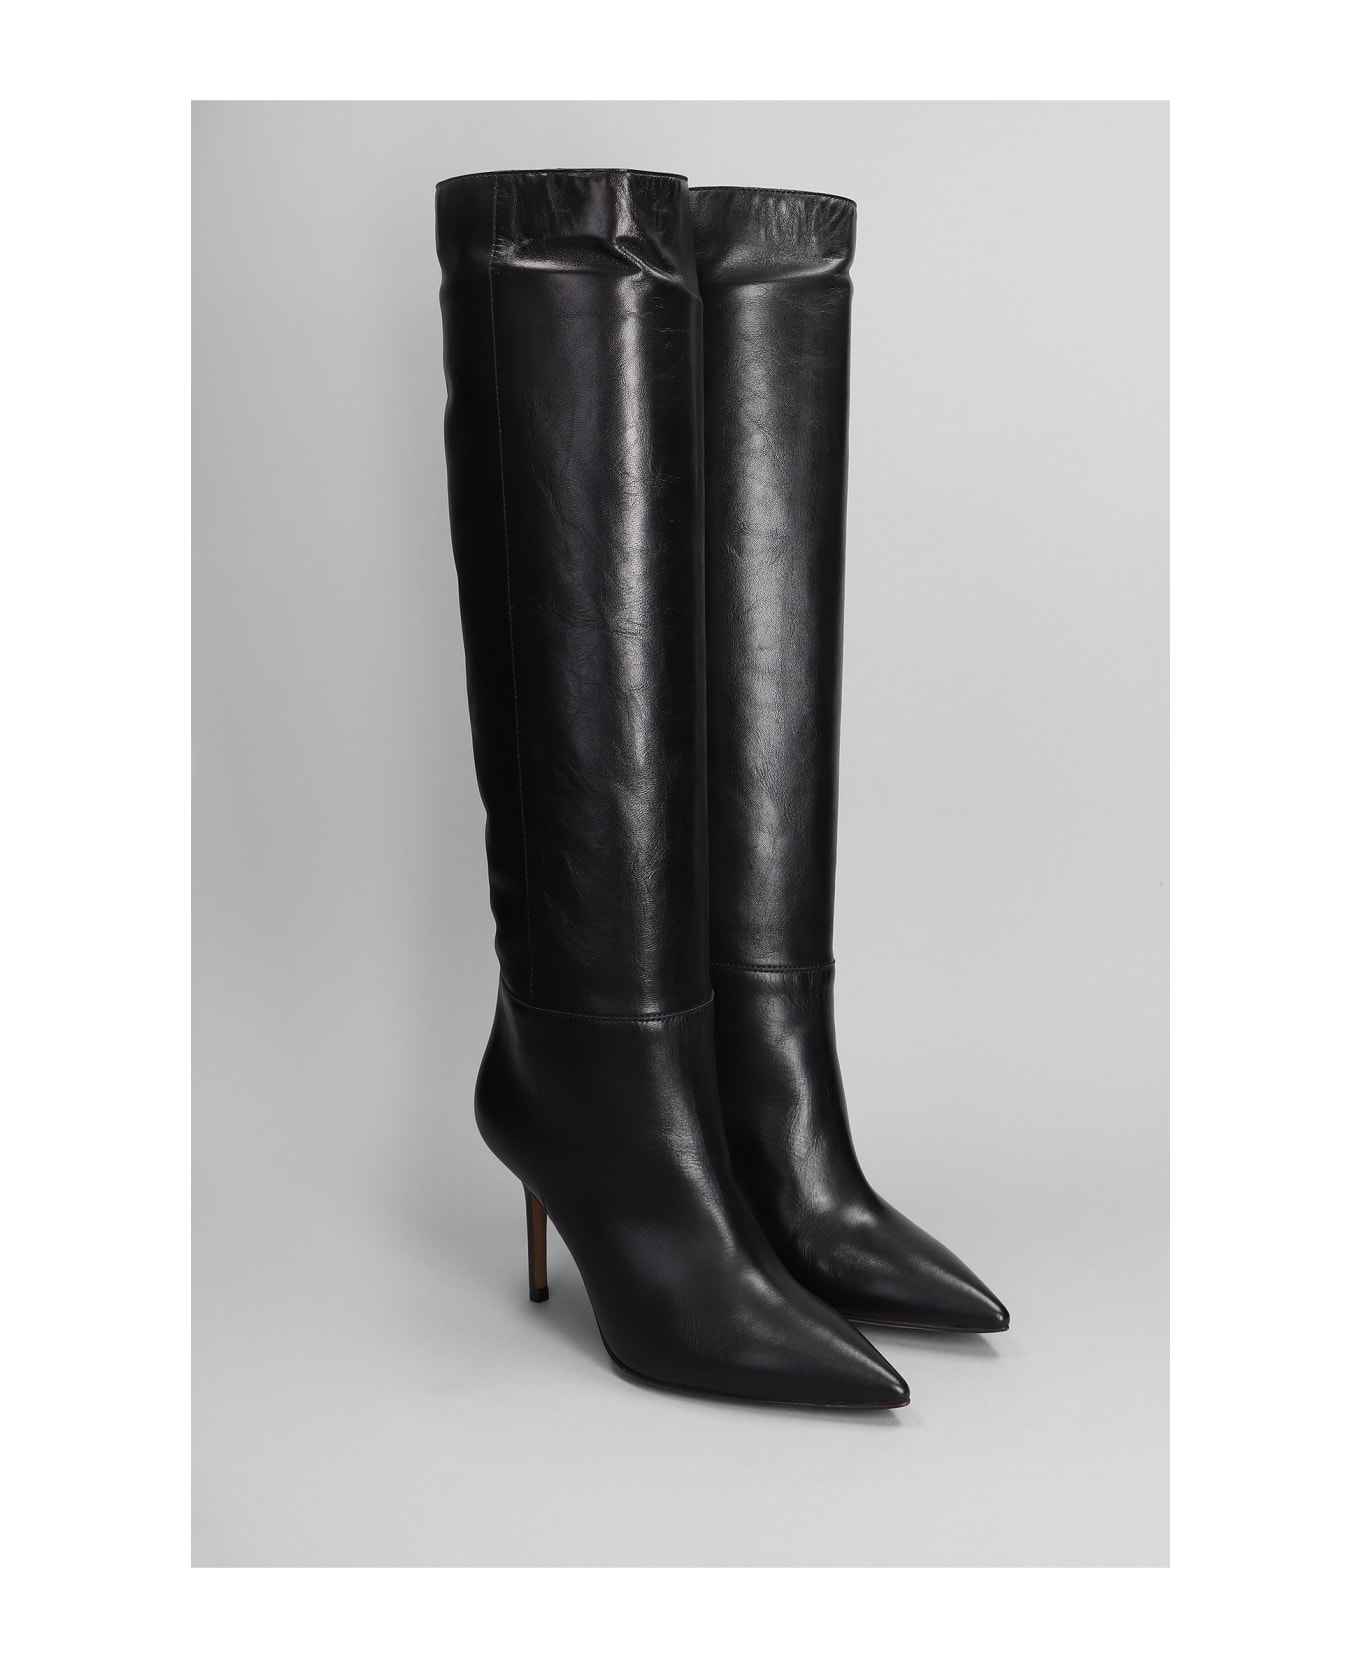 Relac High Heels Boots In Black Leather - black